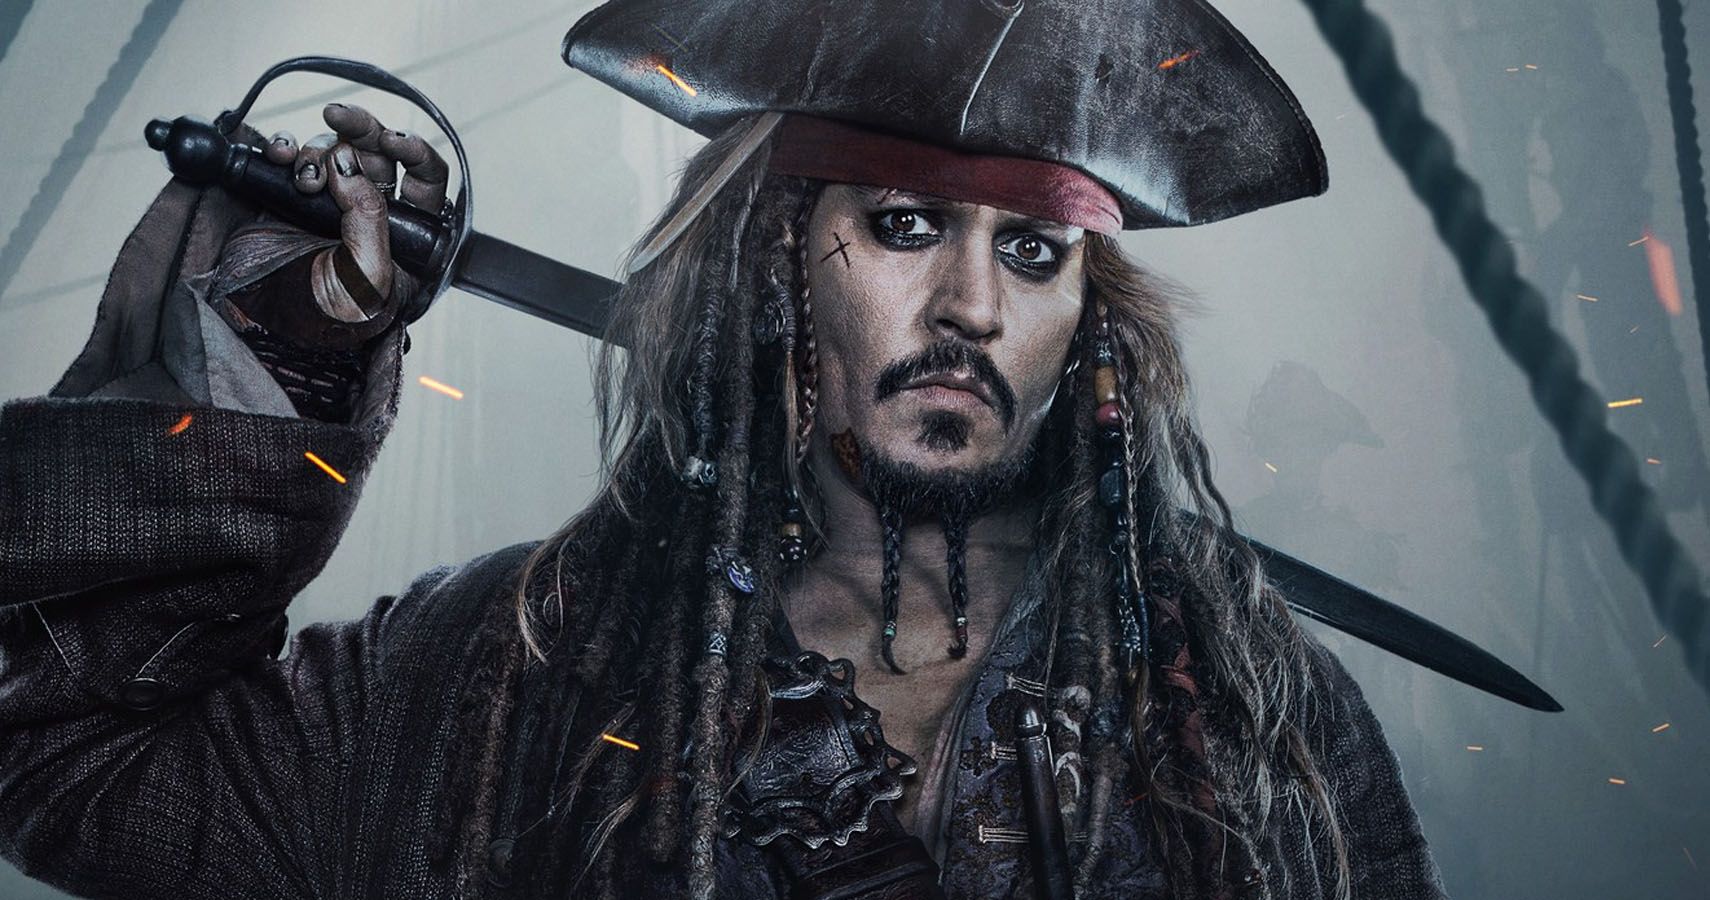 15 Best Johnny Depp Movies Of All Time According To IMDb 